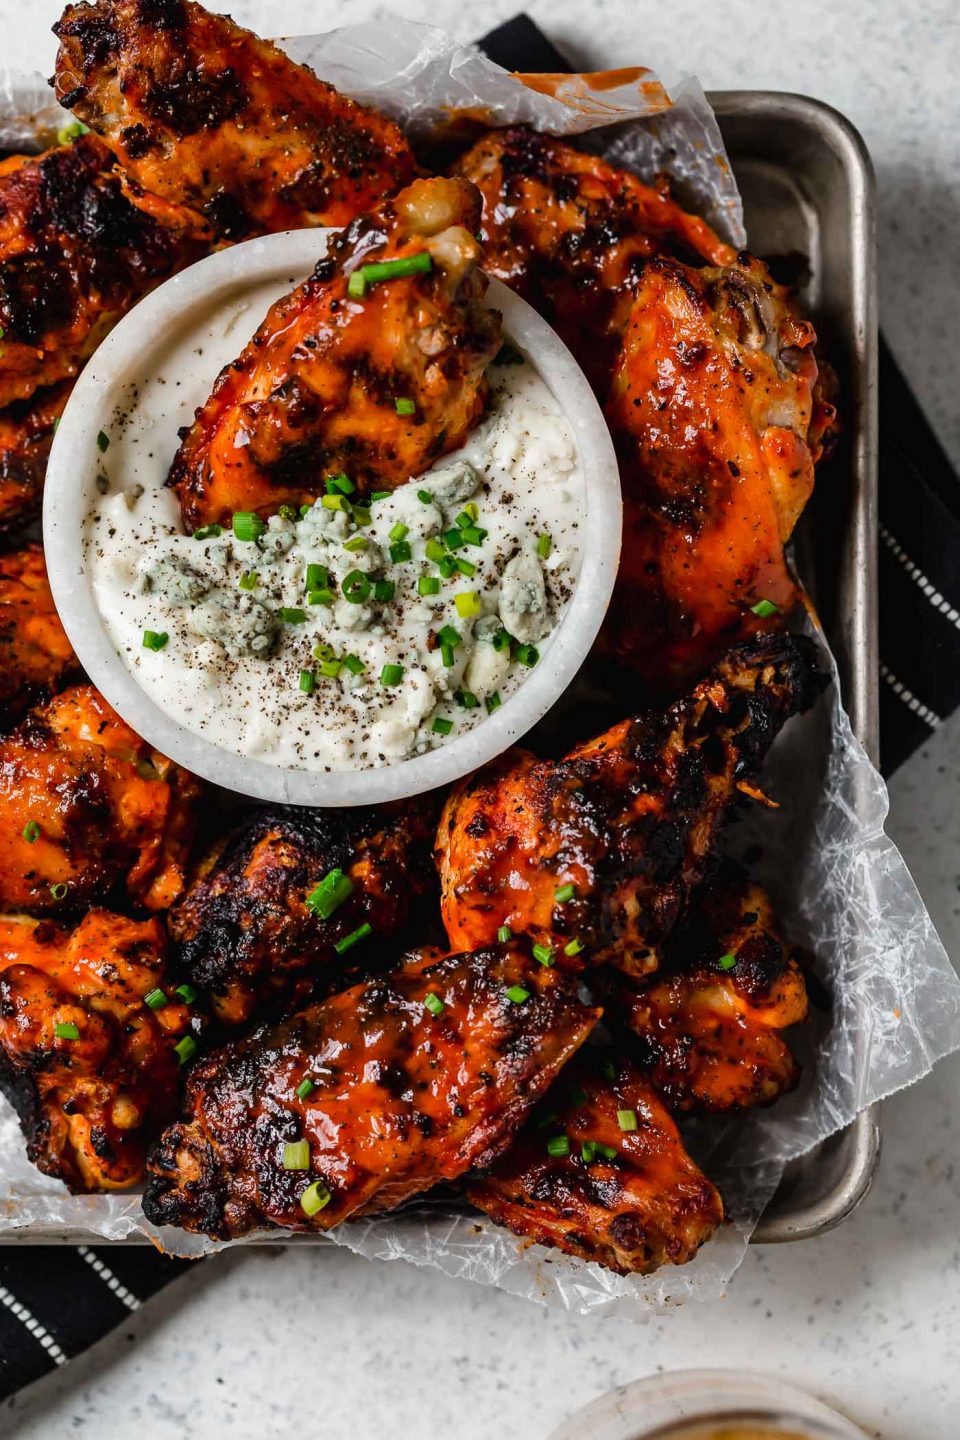 best grilled chicken wings recipe (3 ingredients) | my grilled buffalo chicken wings recipe (grilled hot wings!) stay juicy from a secret step & ingredient! plus my exact steps for how to grill chicken wings. #playswellwithbutter #chickenwings #grilling #chickenwingsrecipe #grilledchicken #easychickenwings